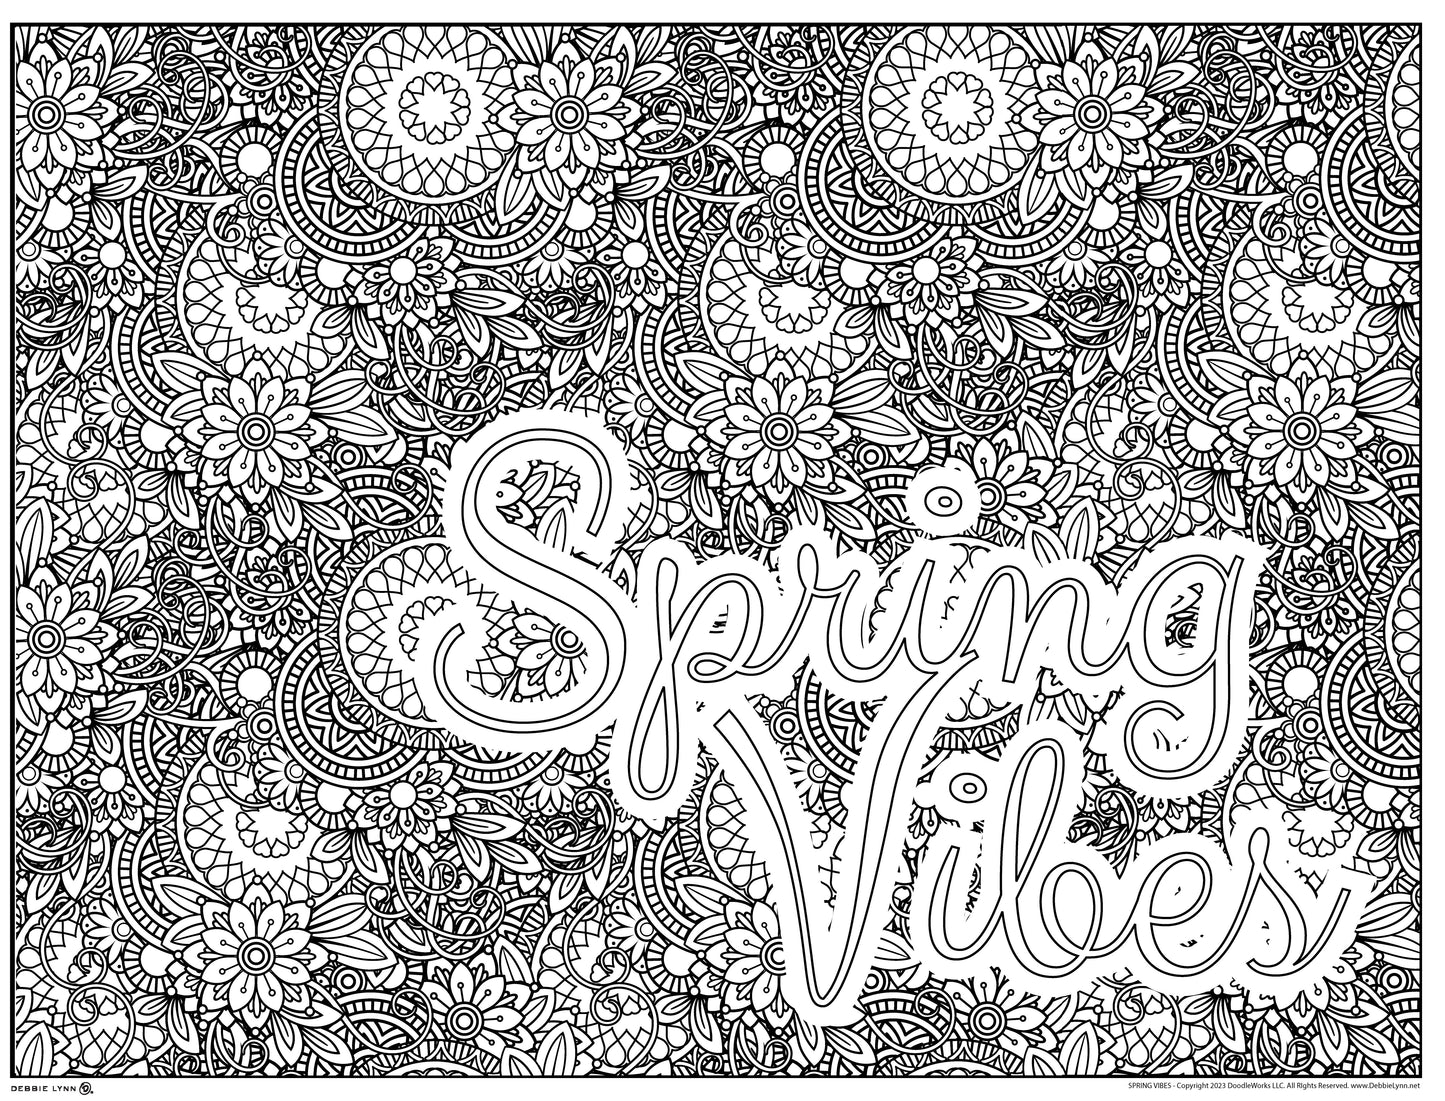 Spring Vibes Personalized Giant Coloring Poster 46"x60"